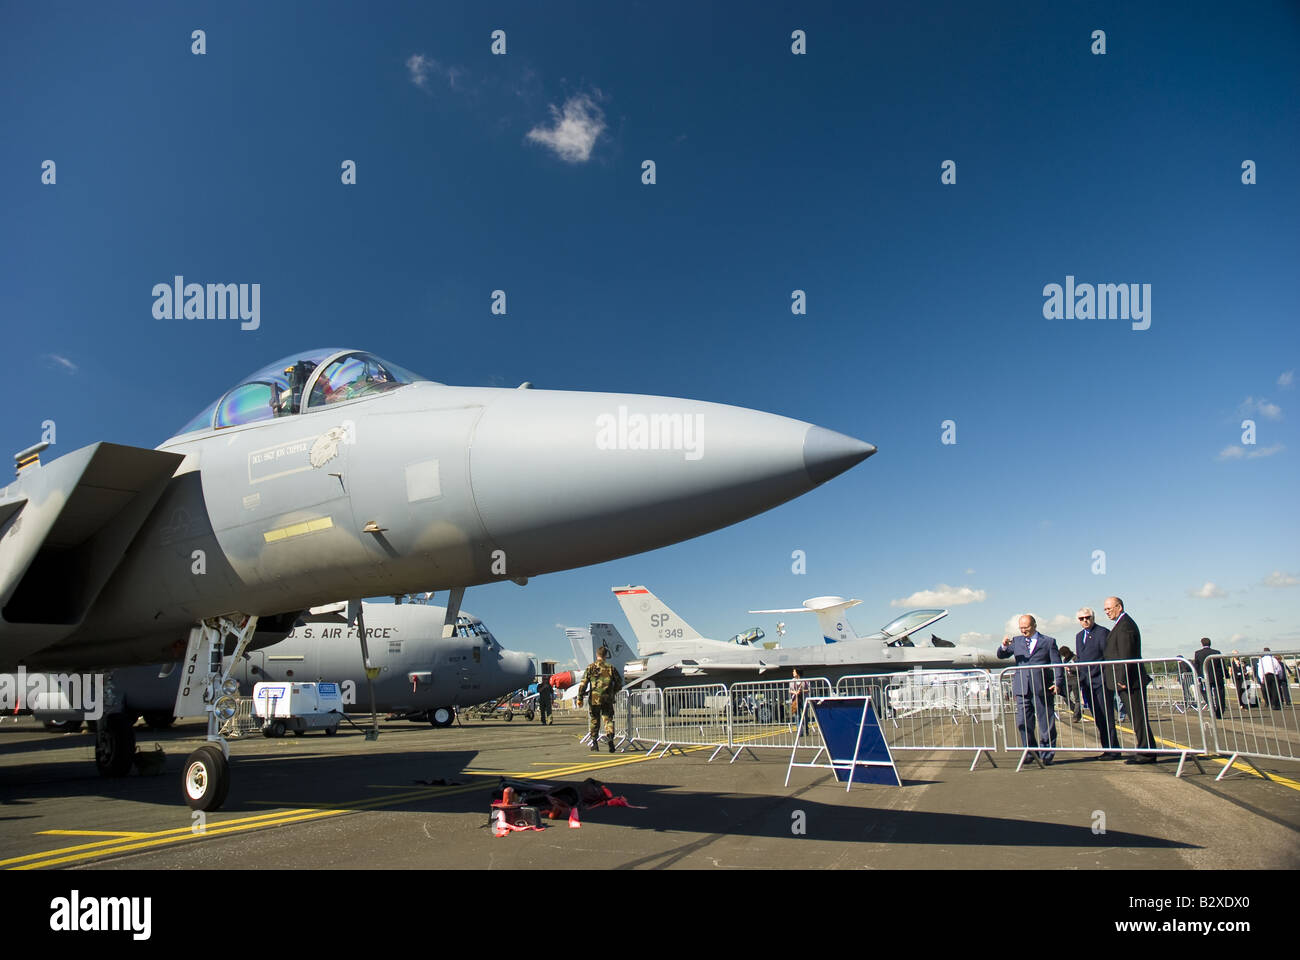 An American jet fighter on display at the Farnborough Airshow in England, UK. Stock Photo